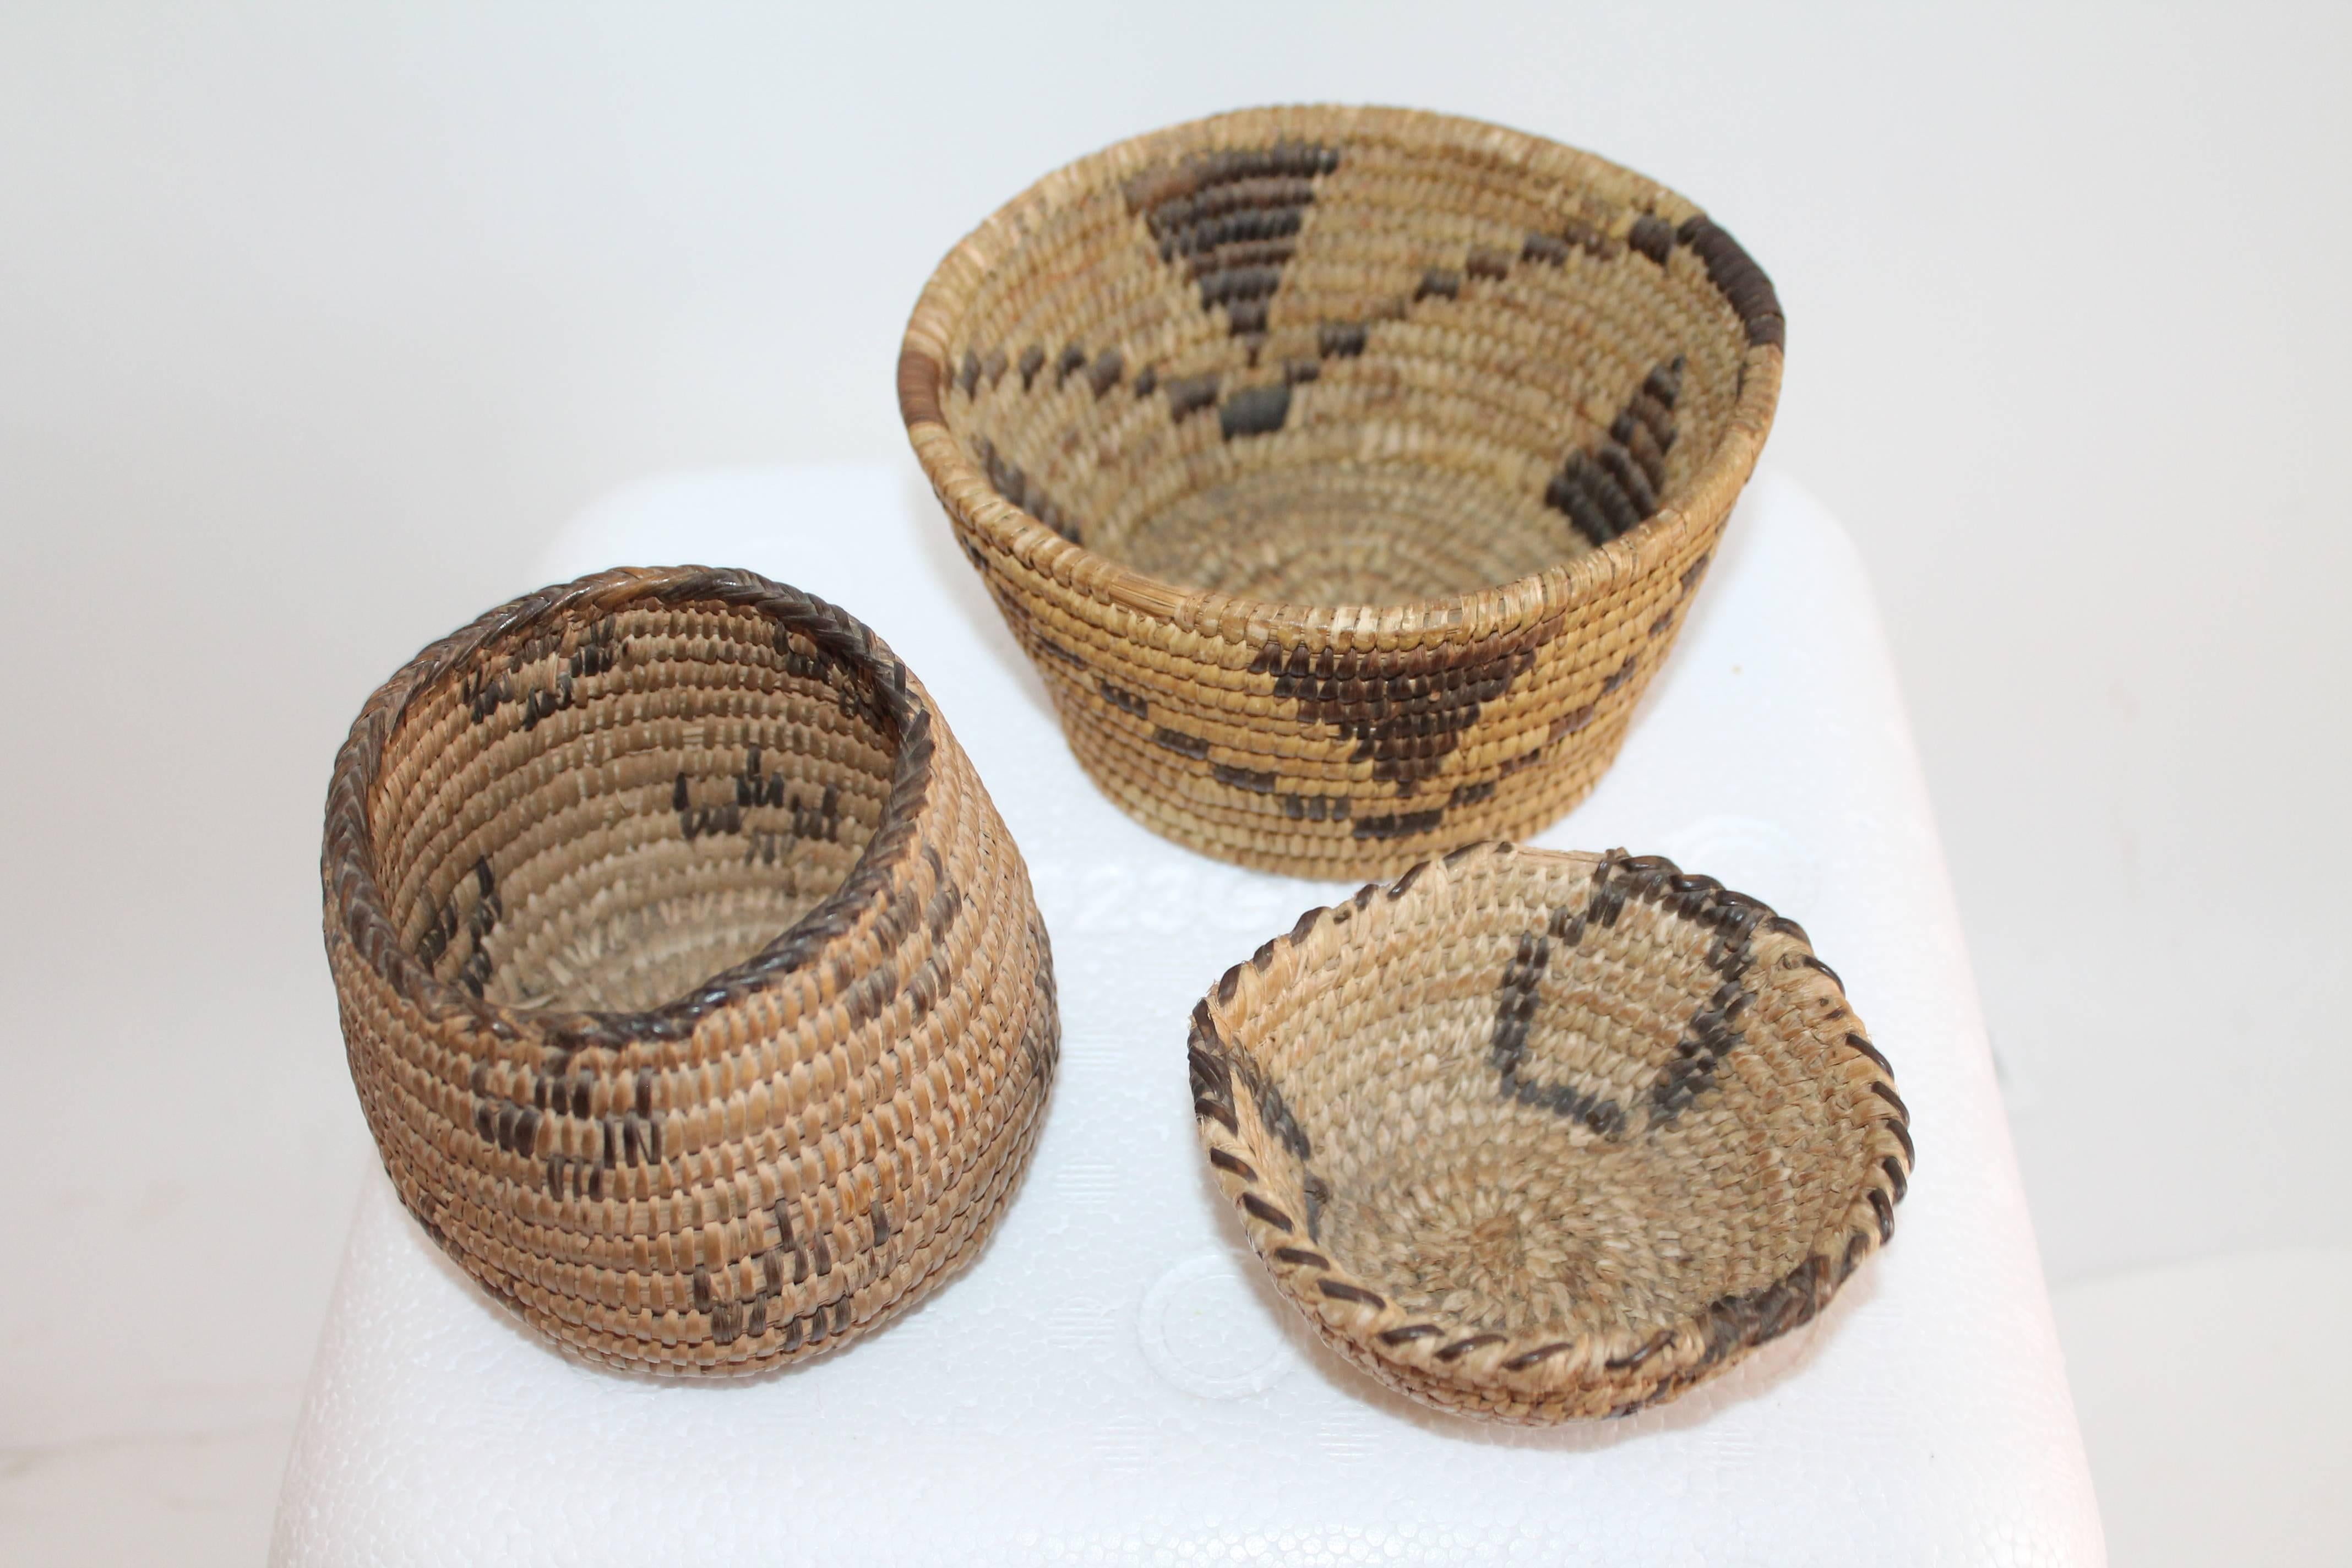 American Collection of Five Pima Indian Baskets